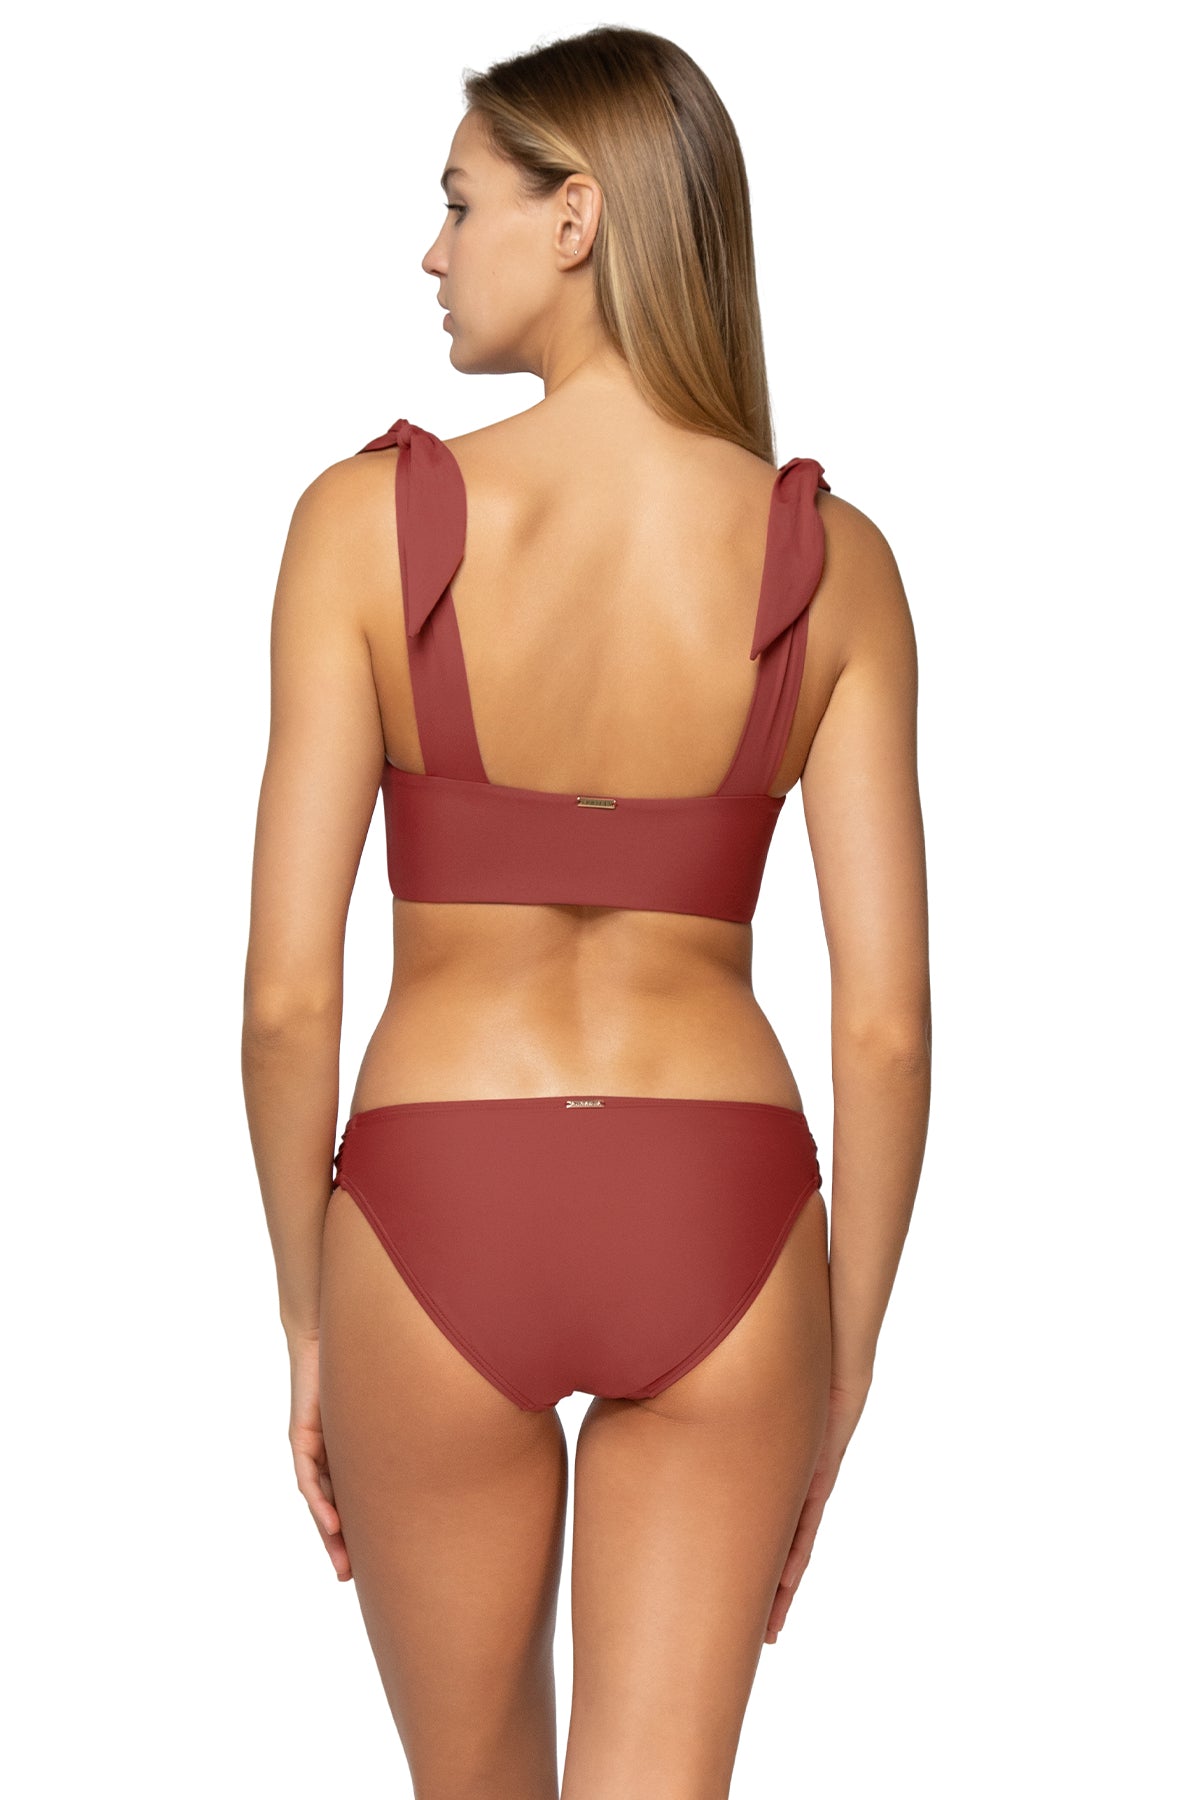 Back view of Sunsets Tuscan Red Femme Fatale Hipster Bottom with matching Lily Top bikini